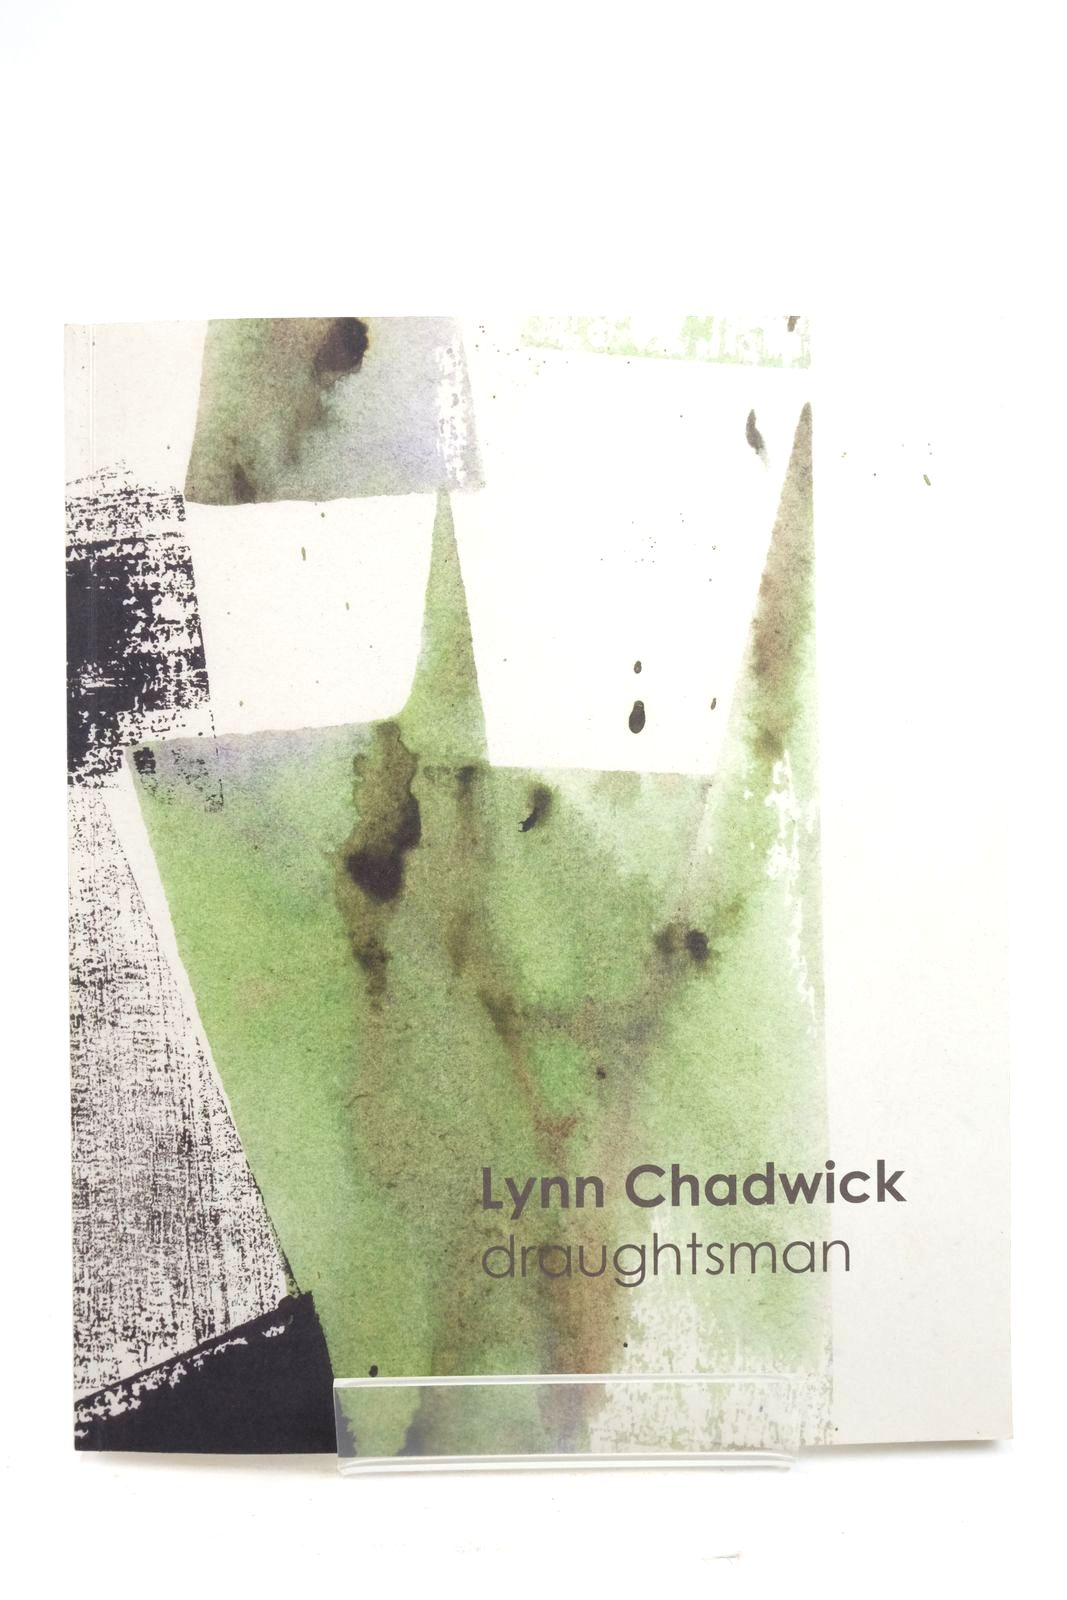 Photo of LYNN CHADWICK DRAUGHTSMAN 2015 illustrated by Chadwick, Lynn published by Gallery Pangolin (STOCK CODE: 2136712)  for sale by Stella & Rose's Books